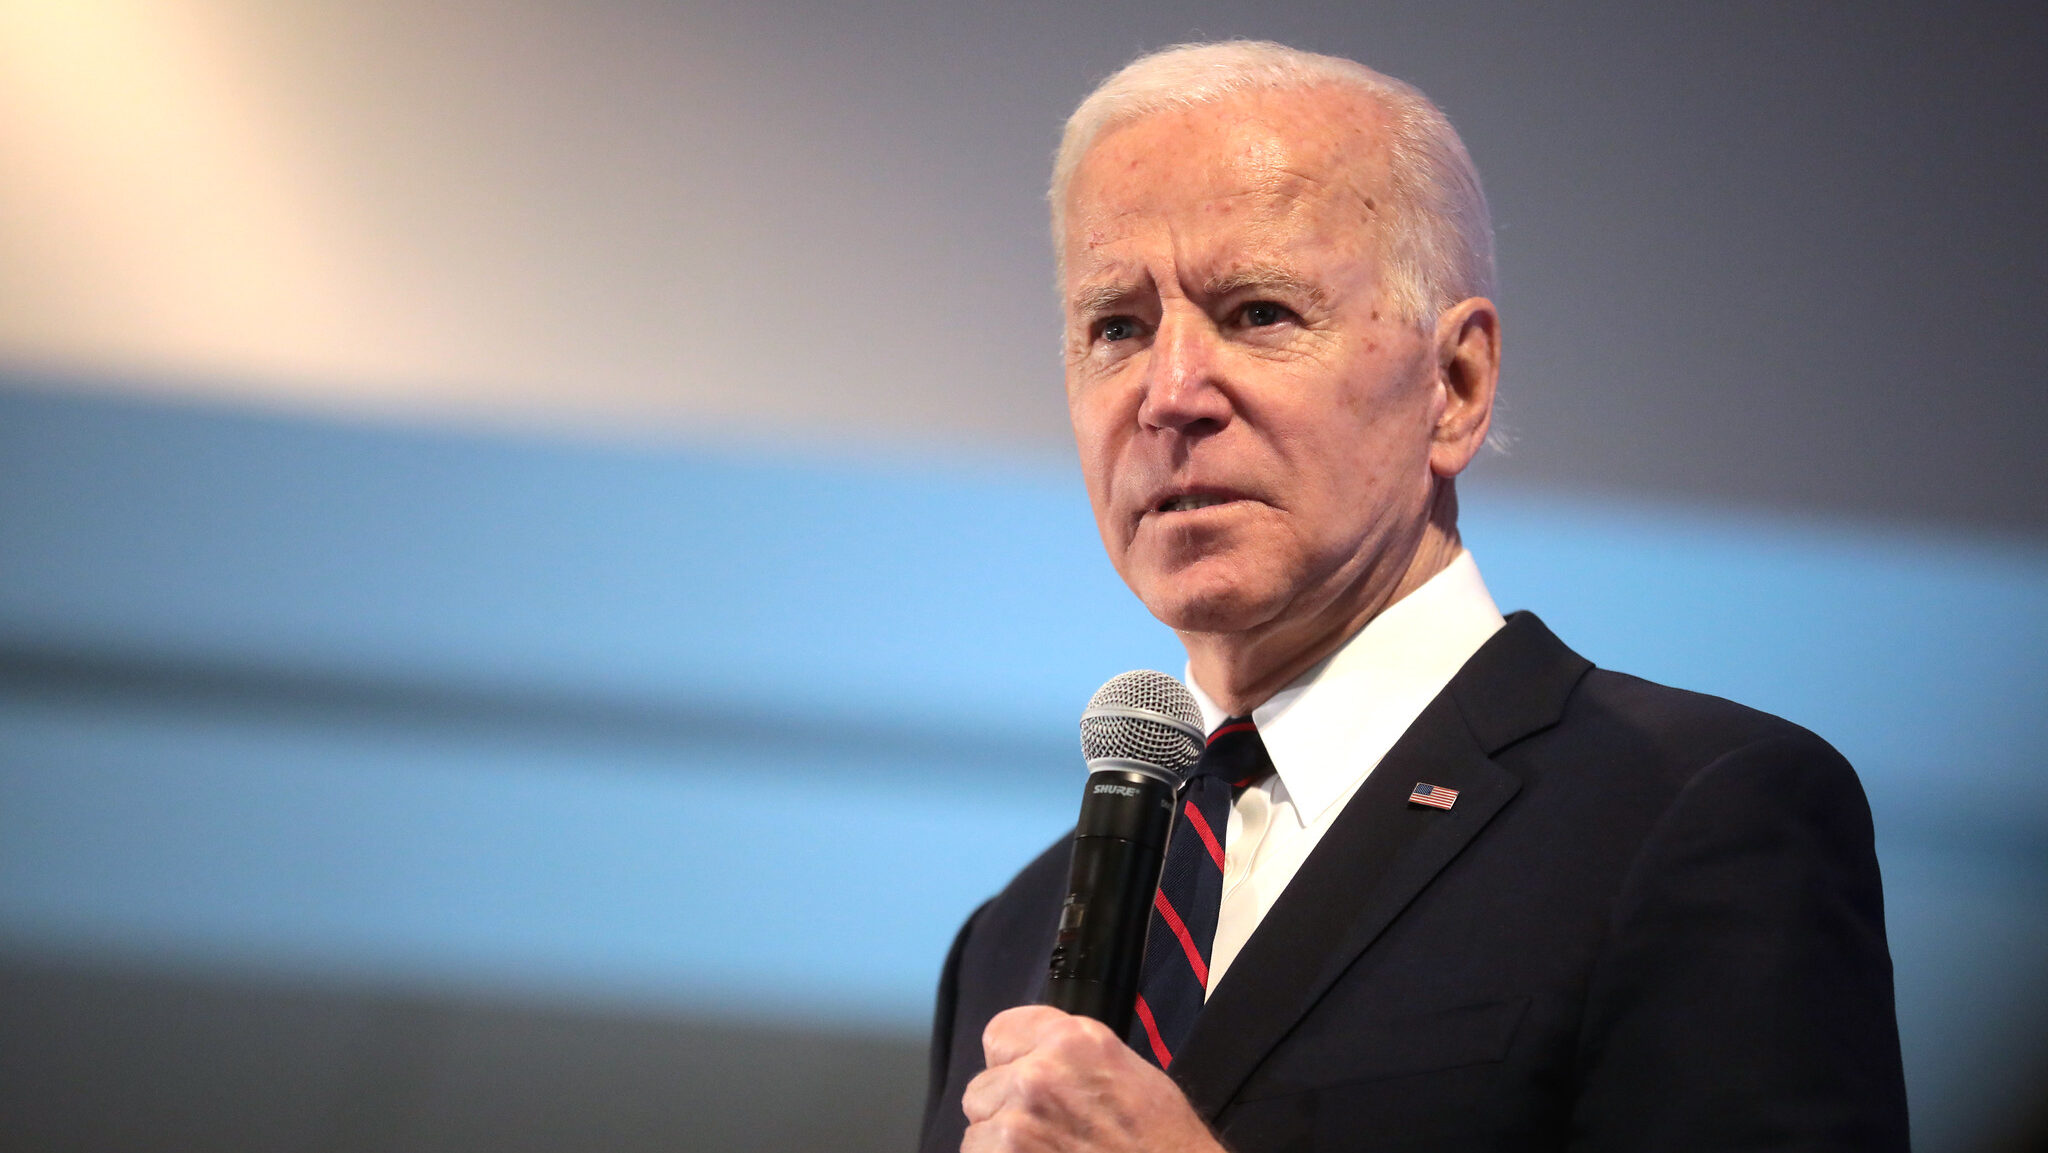 Nebraska Proposal May Block Biden’s Simplest Route to Victory if Republicans Enact It Promptly